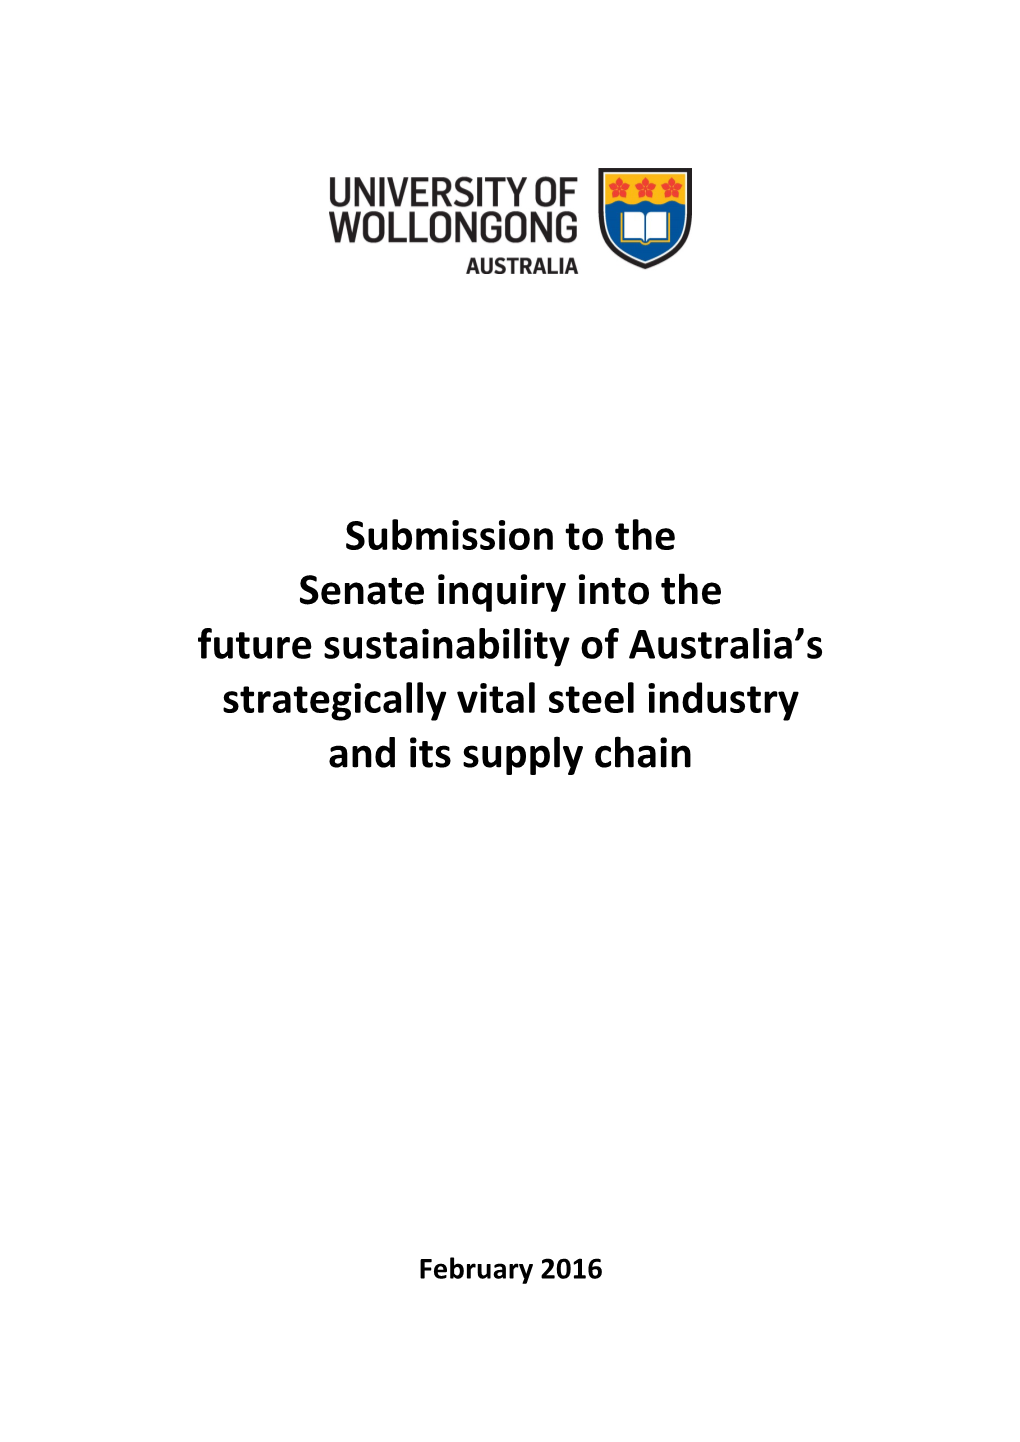 Submission to the Senate Inquiry Into the Future Sustainability of Australia’S Strategically Vital Steel Industry and Its Supply Chain